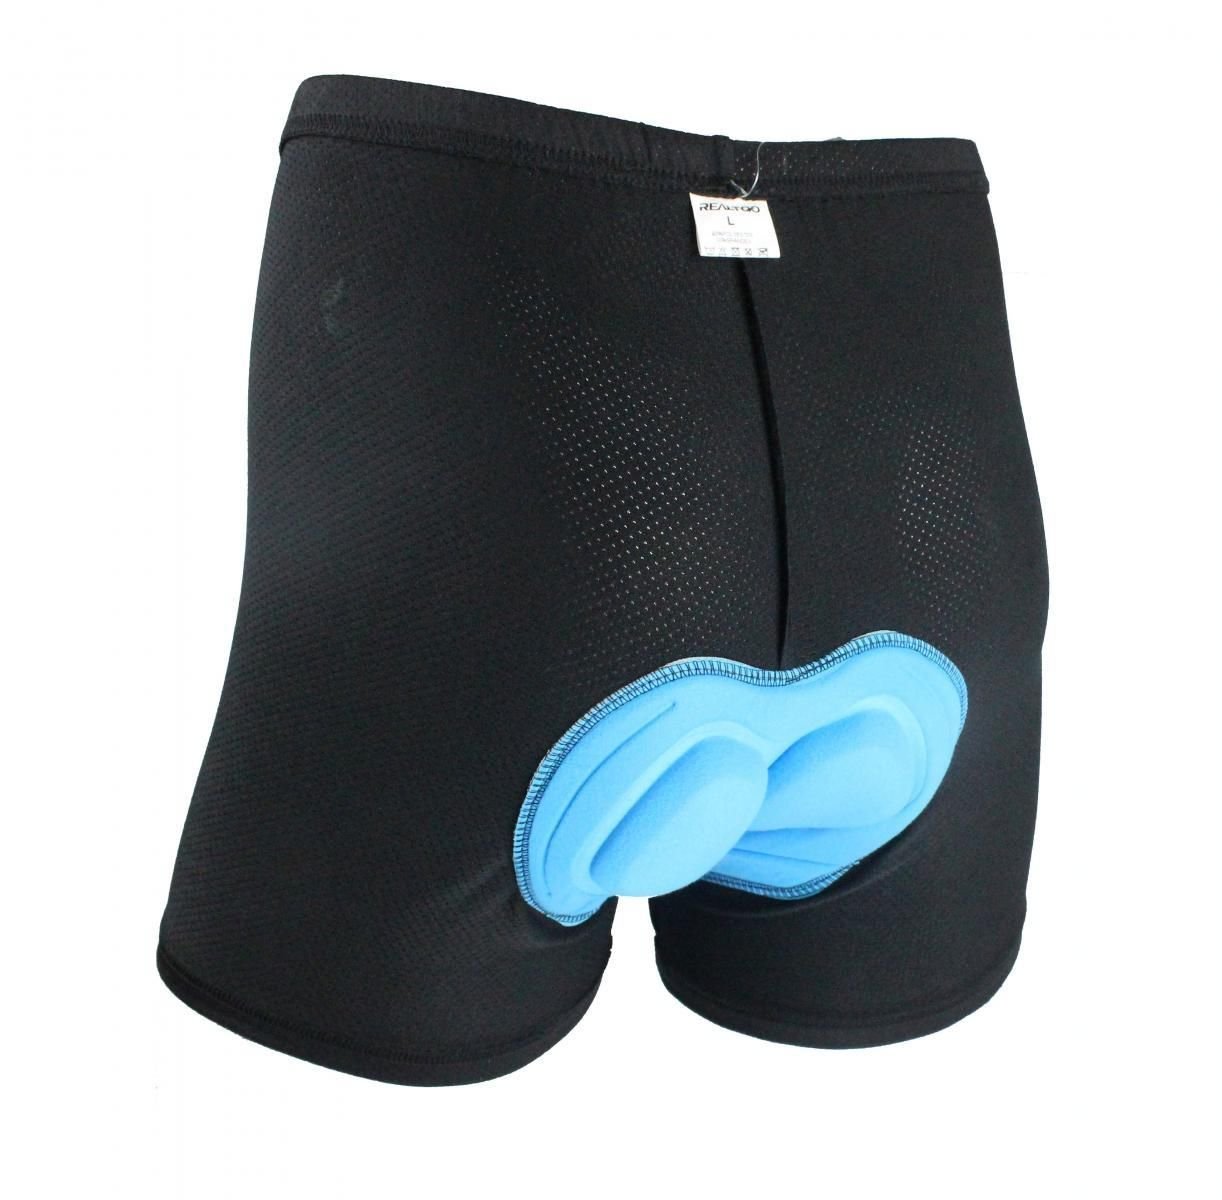 New 3D Padded Bicycle Bike Cycling Underwear-Shorts-Pants Comfortable